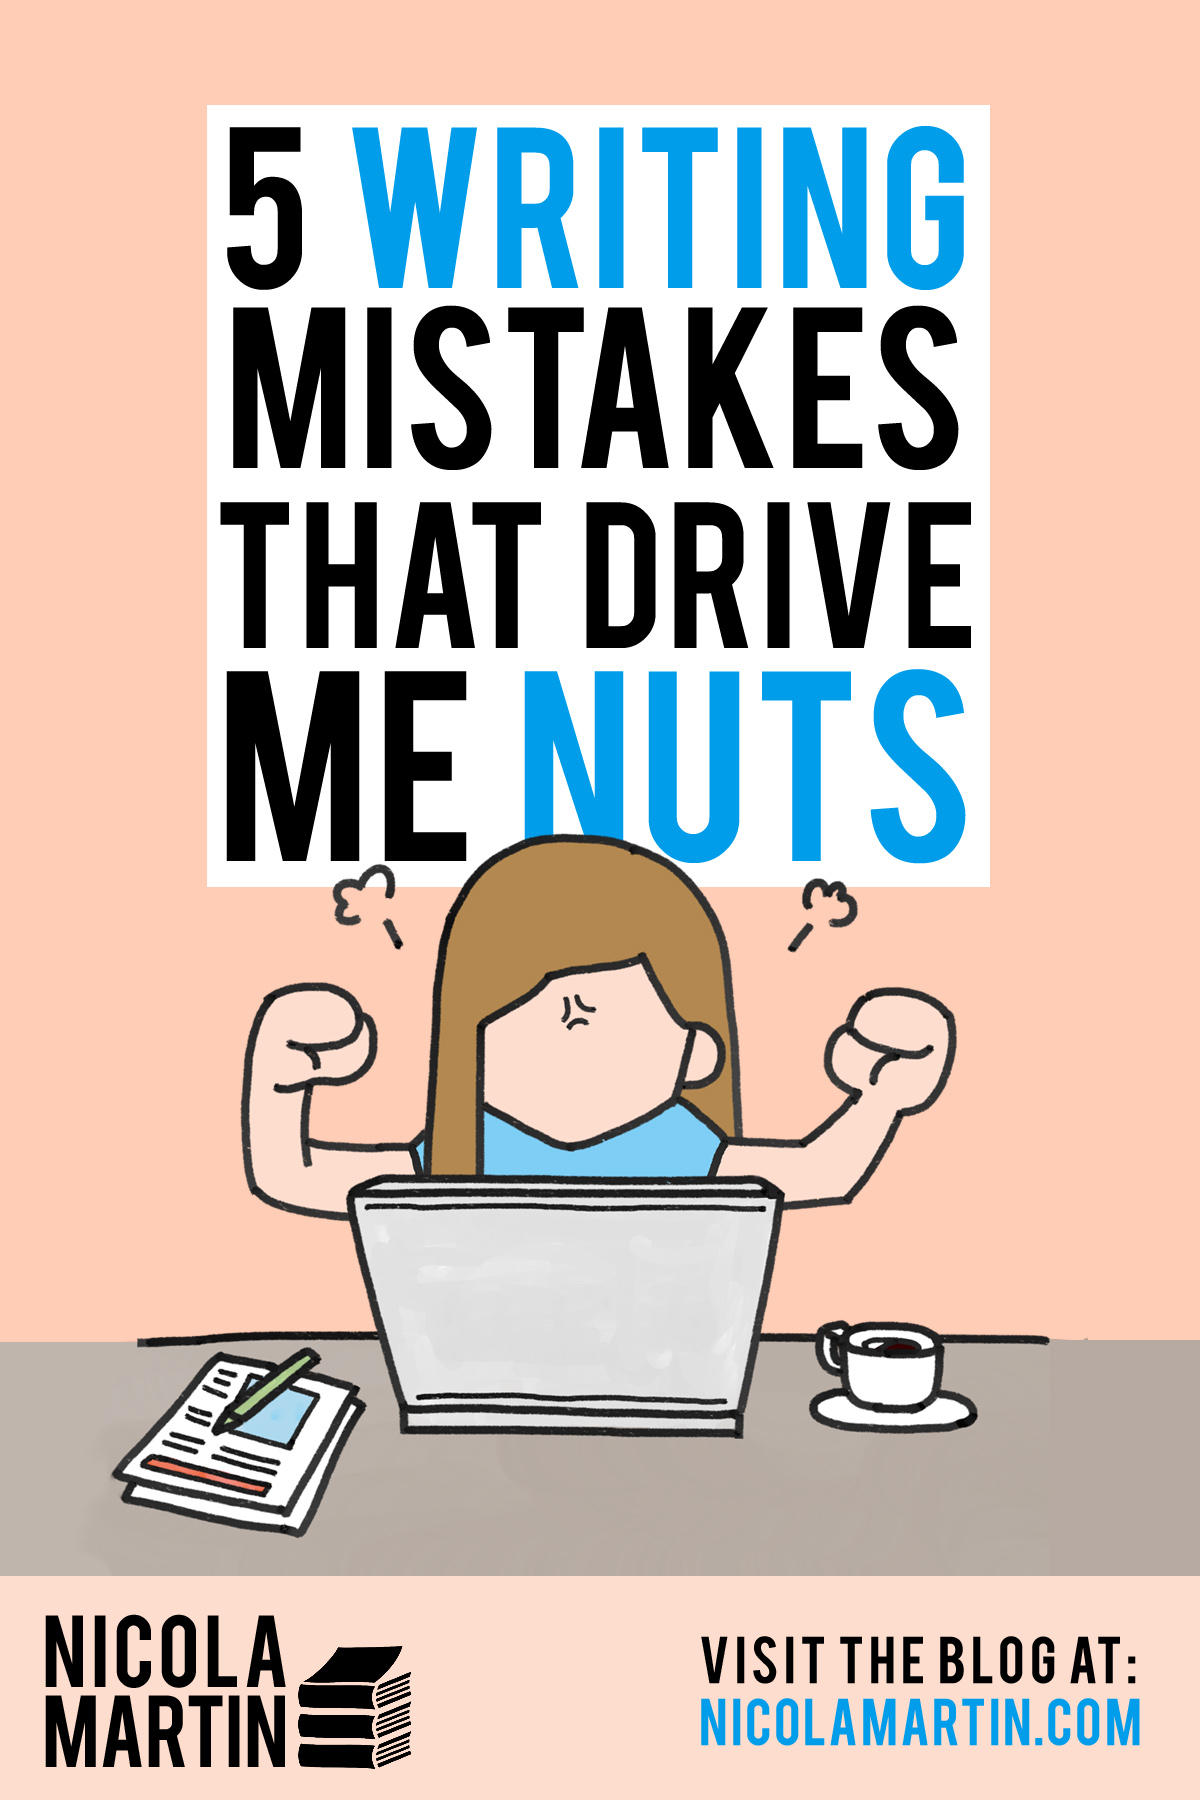 5 writing mistakes that drive me nuts